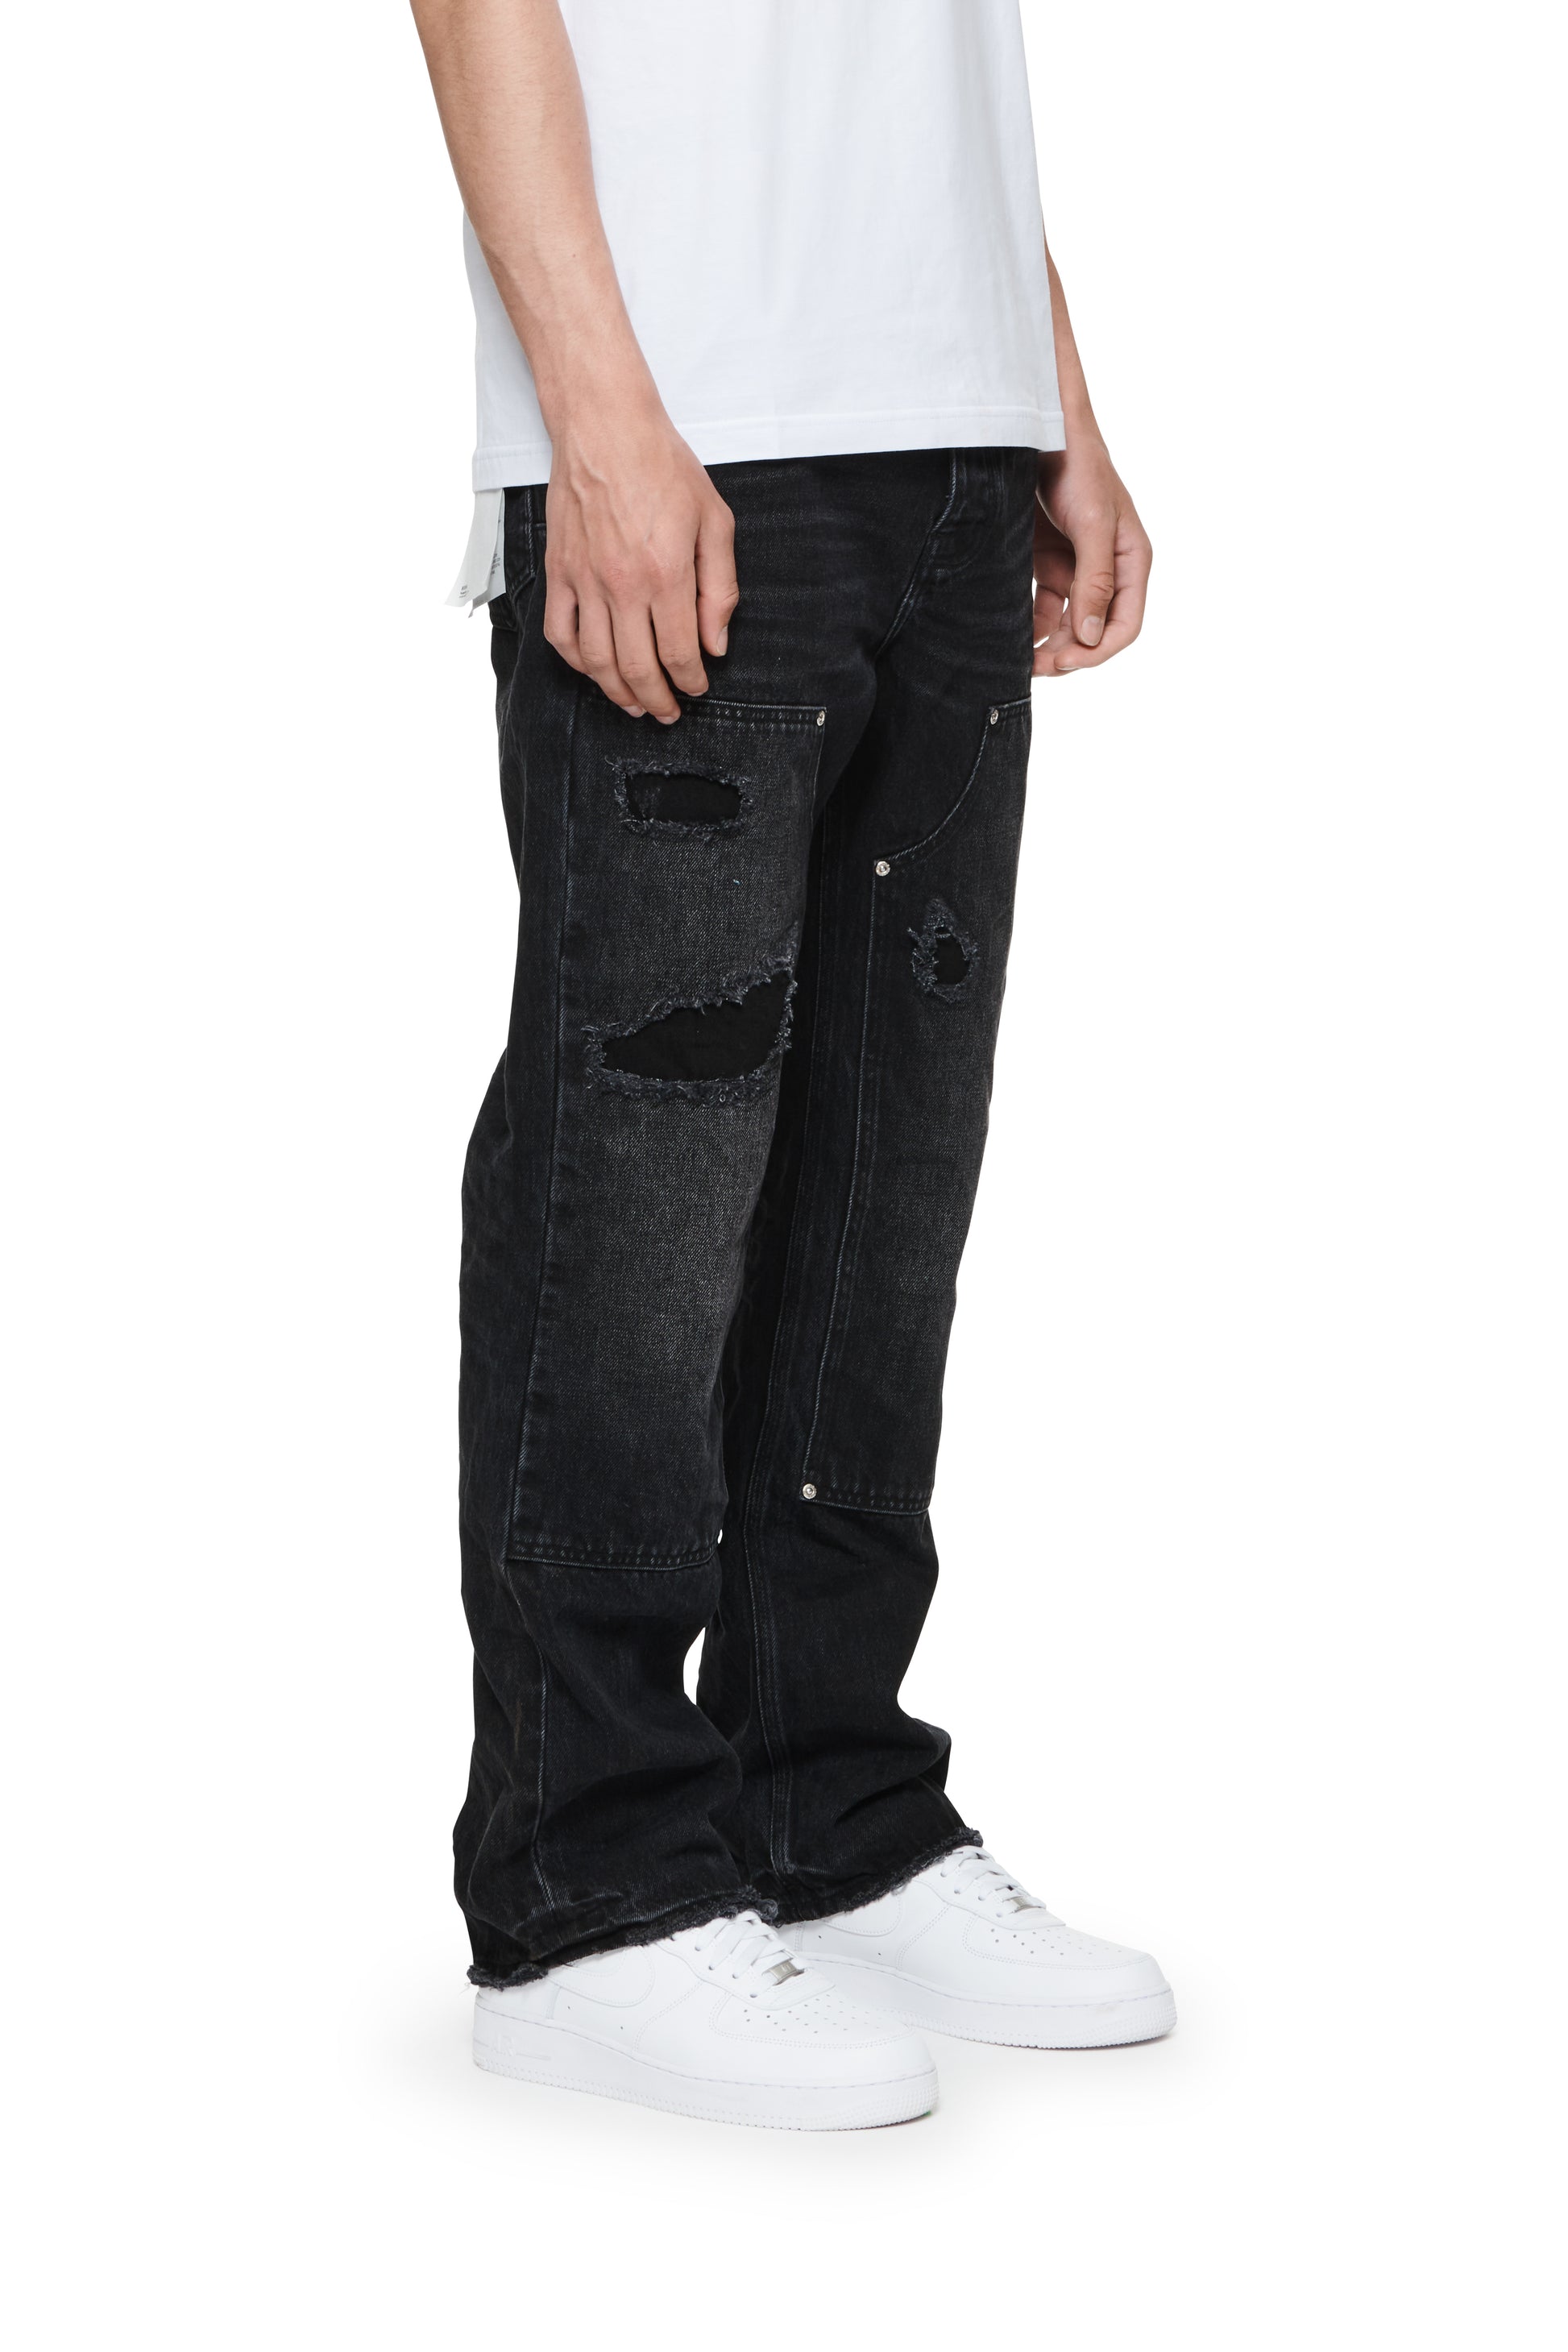 Shop Purple Brand P015 Stone Washed Loose-Fit Carpenter Jeans